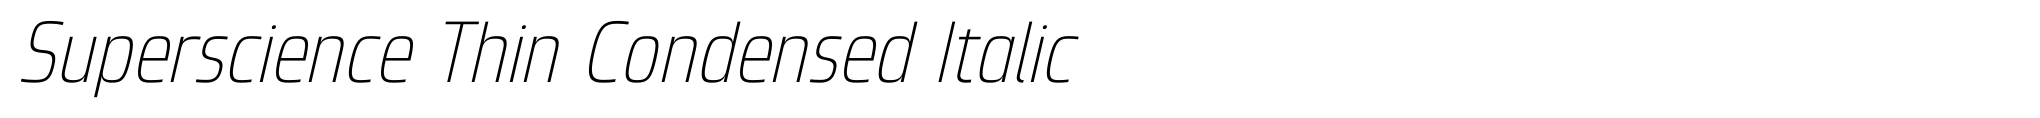 Superscience Thin Condensed Italic image